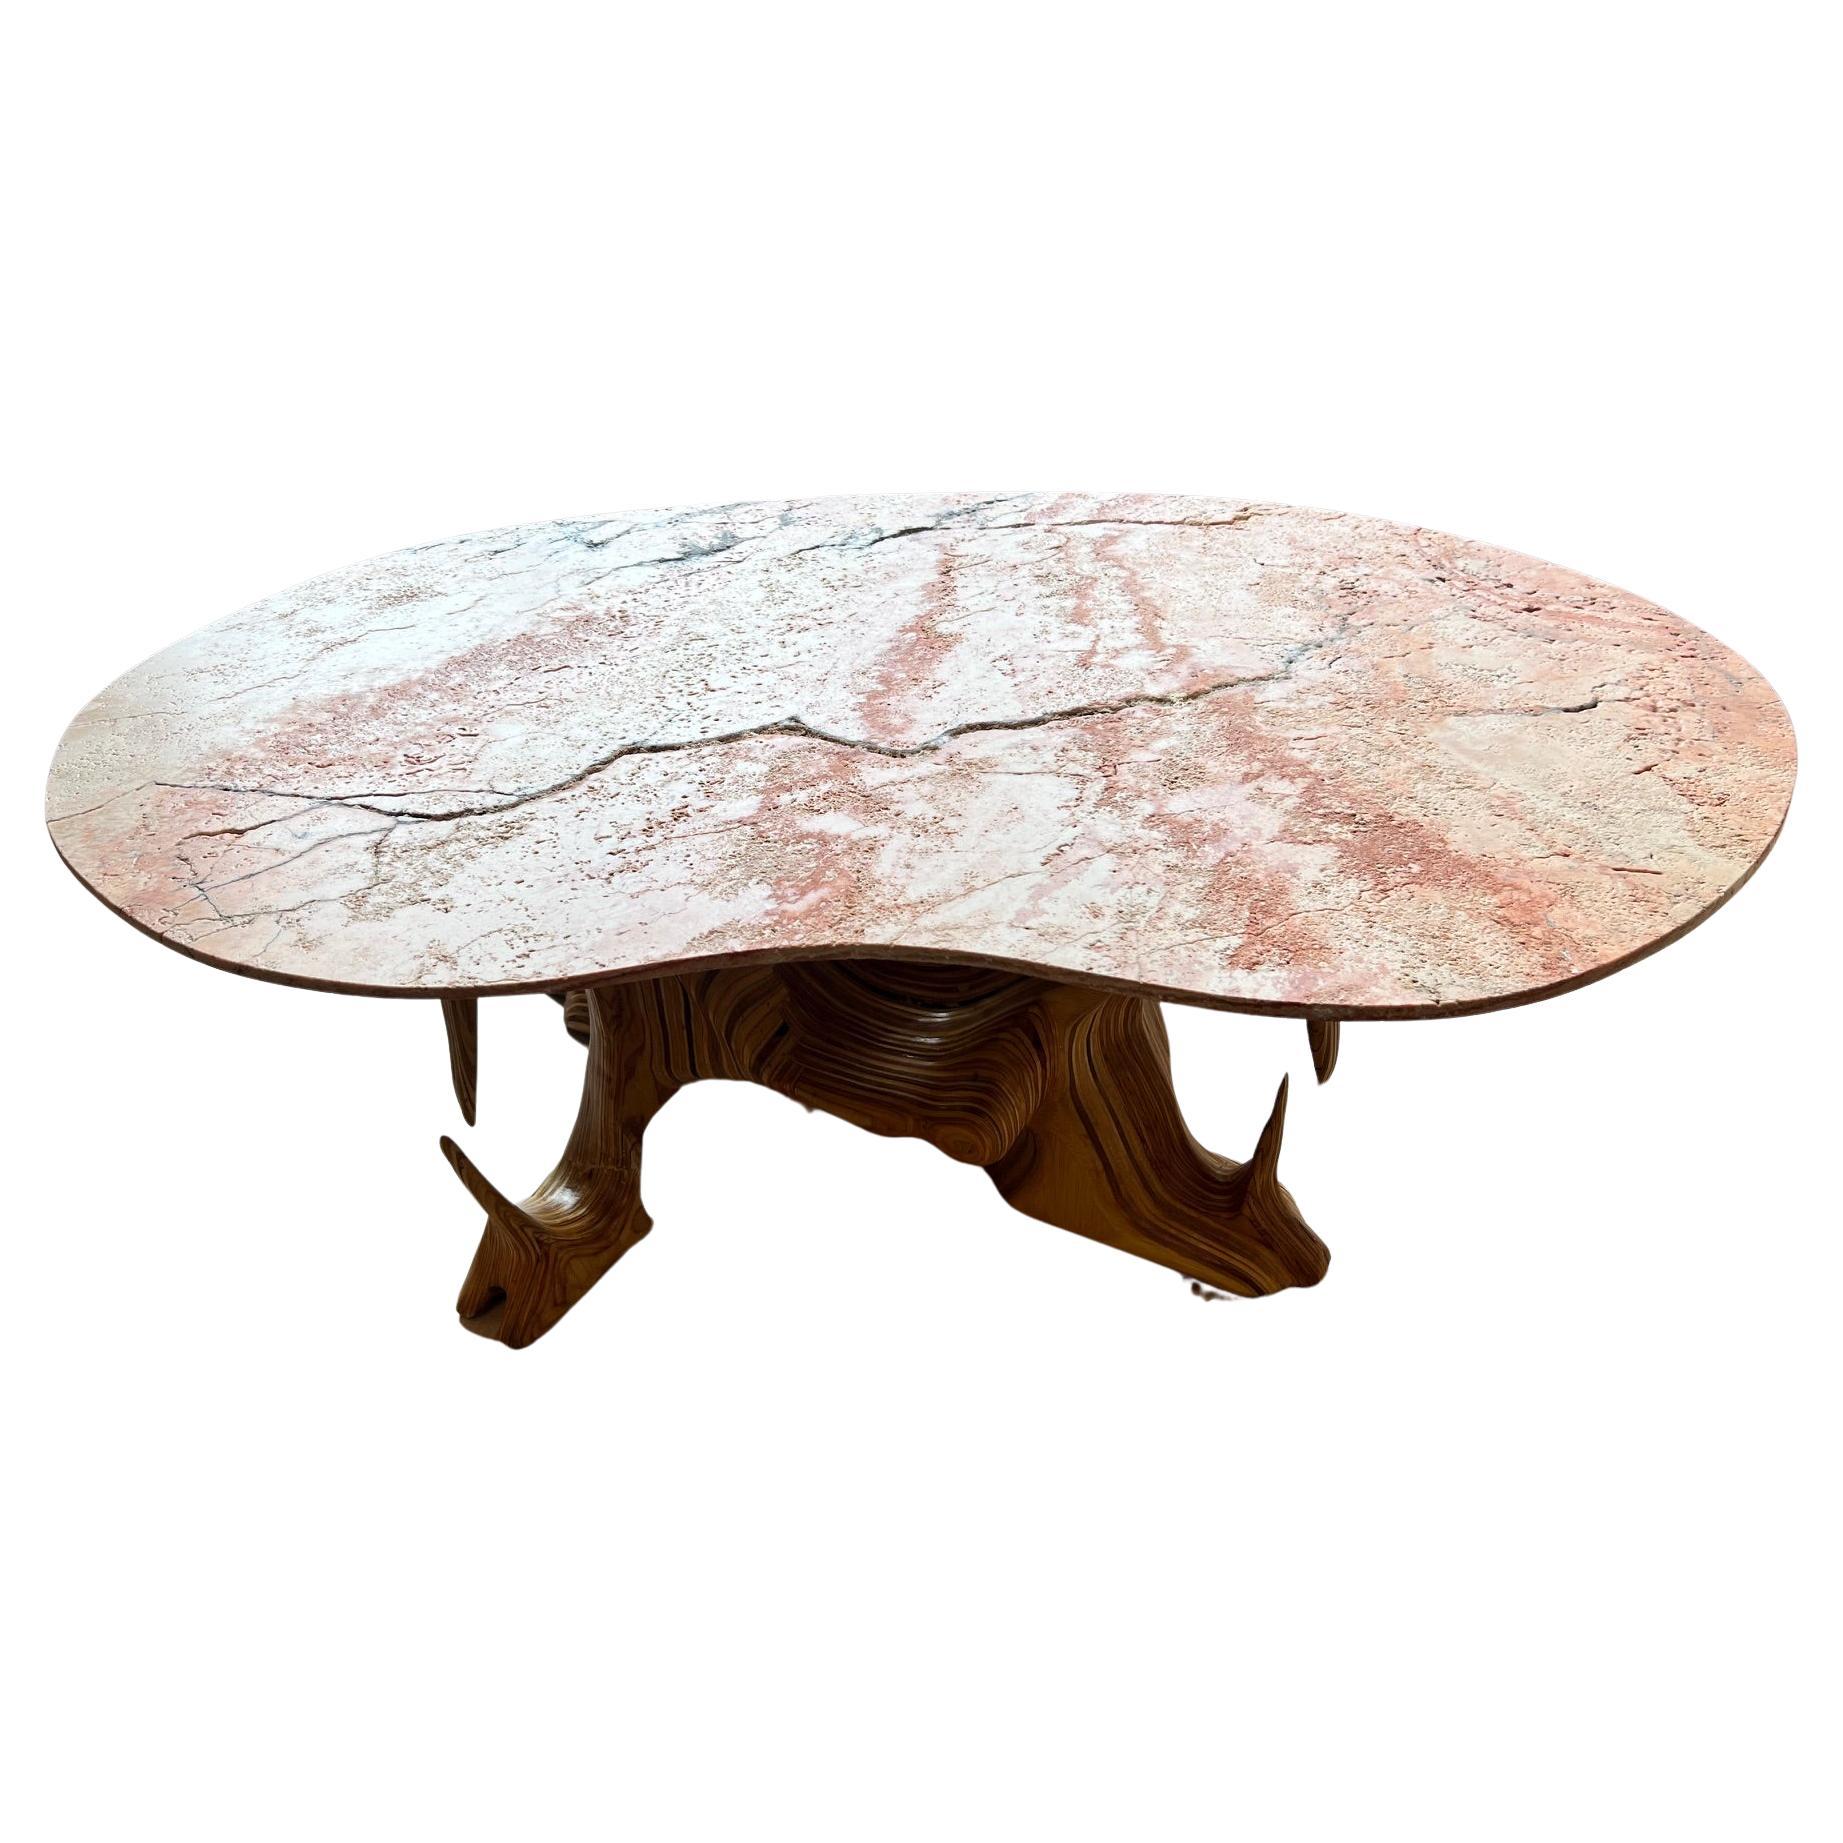 Limited Edition coffee table with tumbled Antique Rouge marble top and sculpted base from layered maple plywood